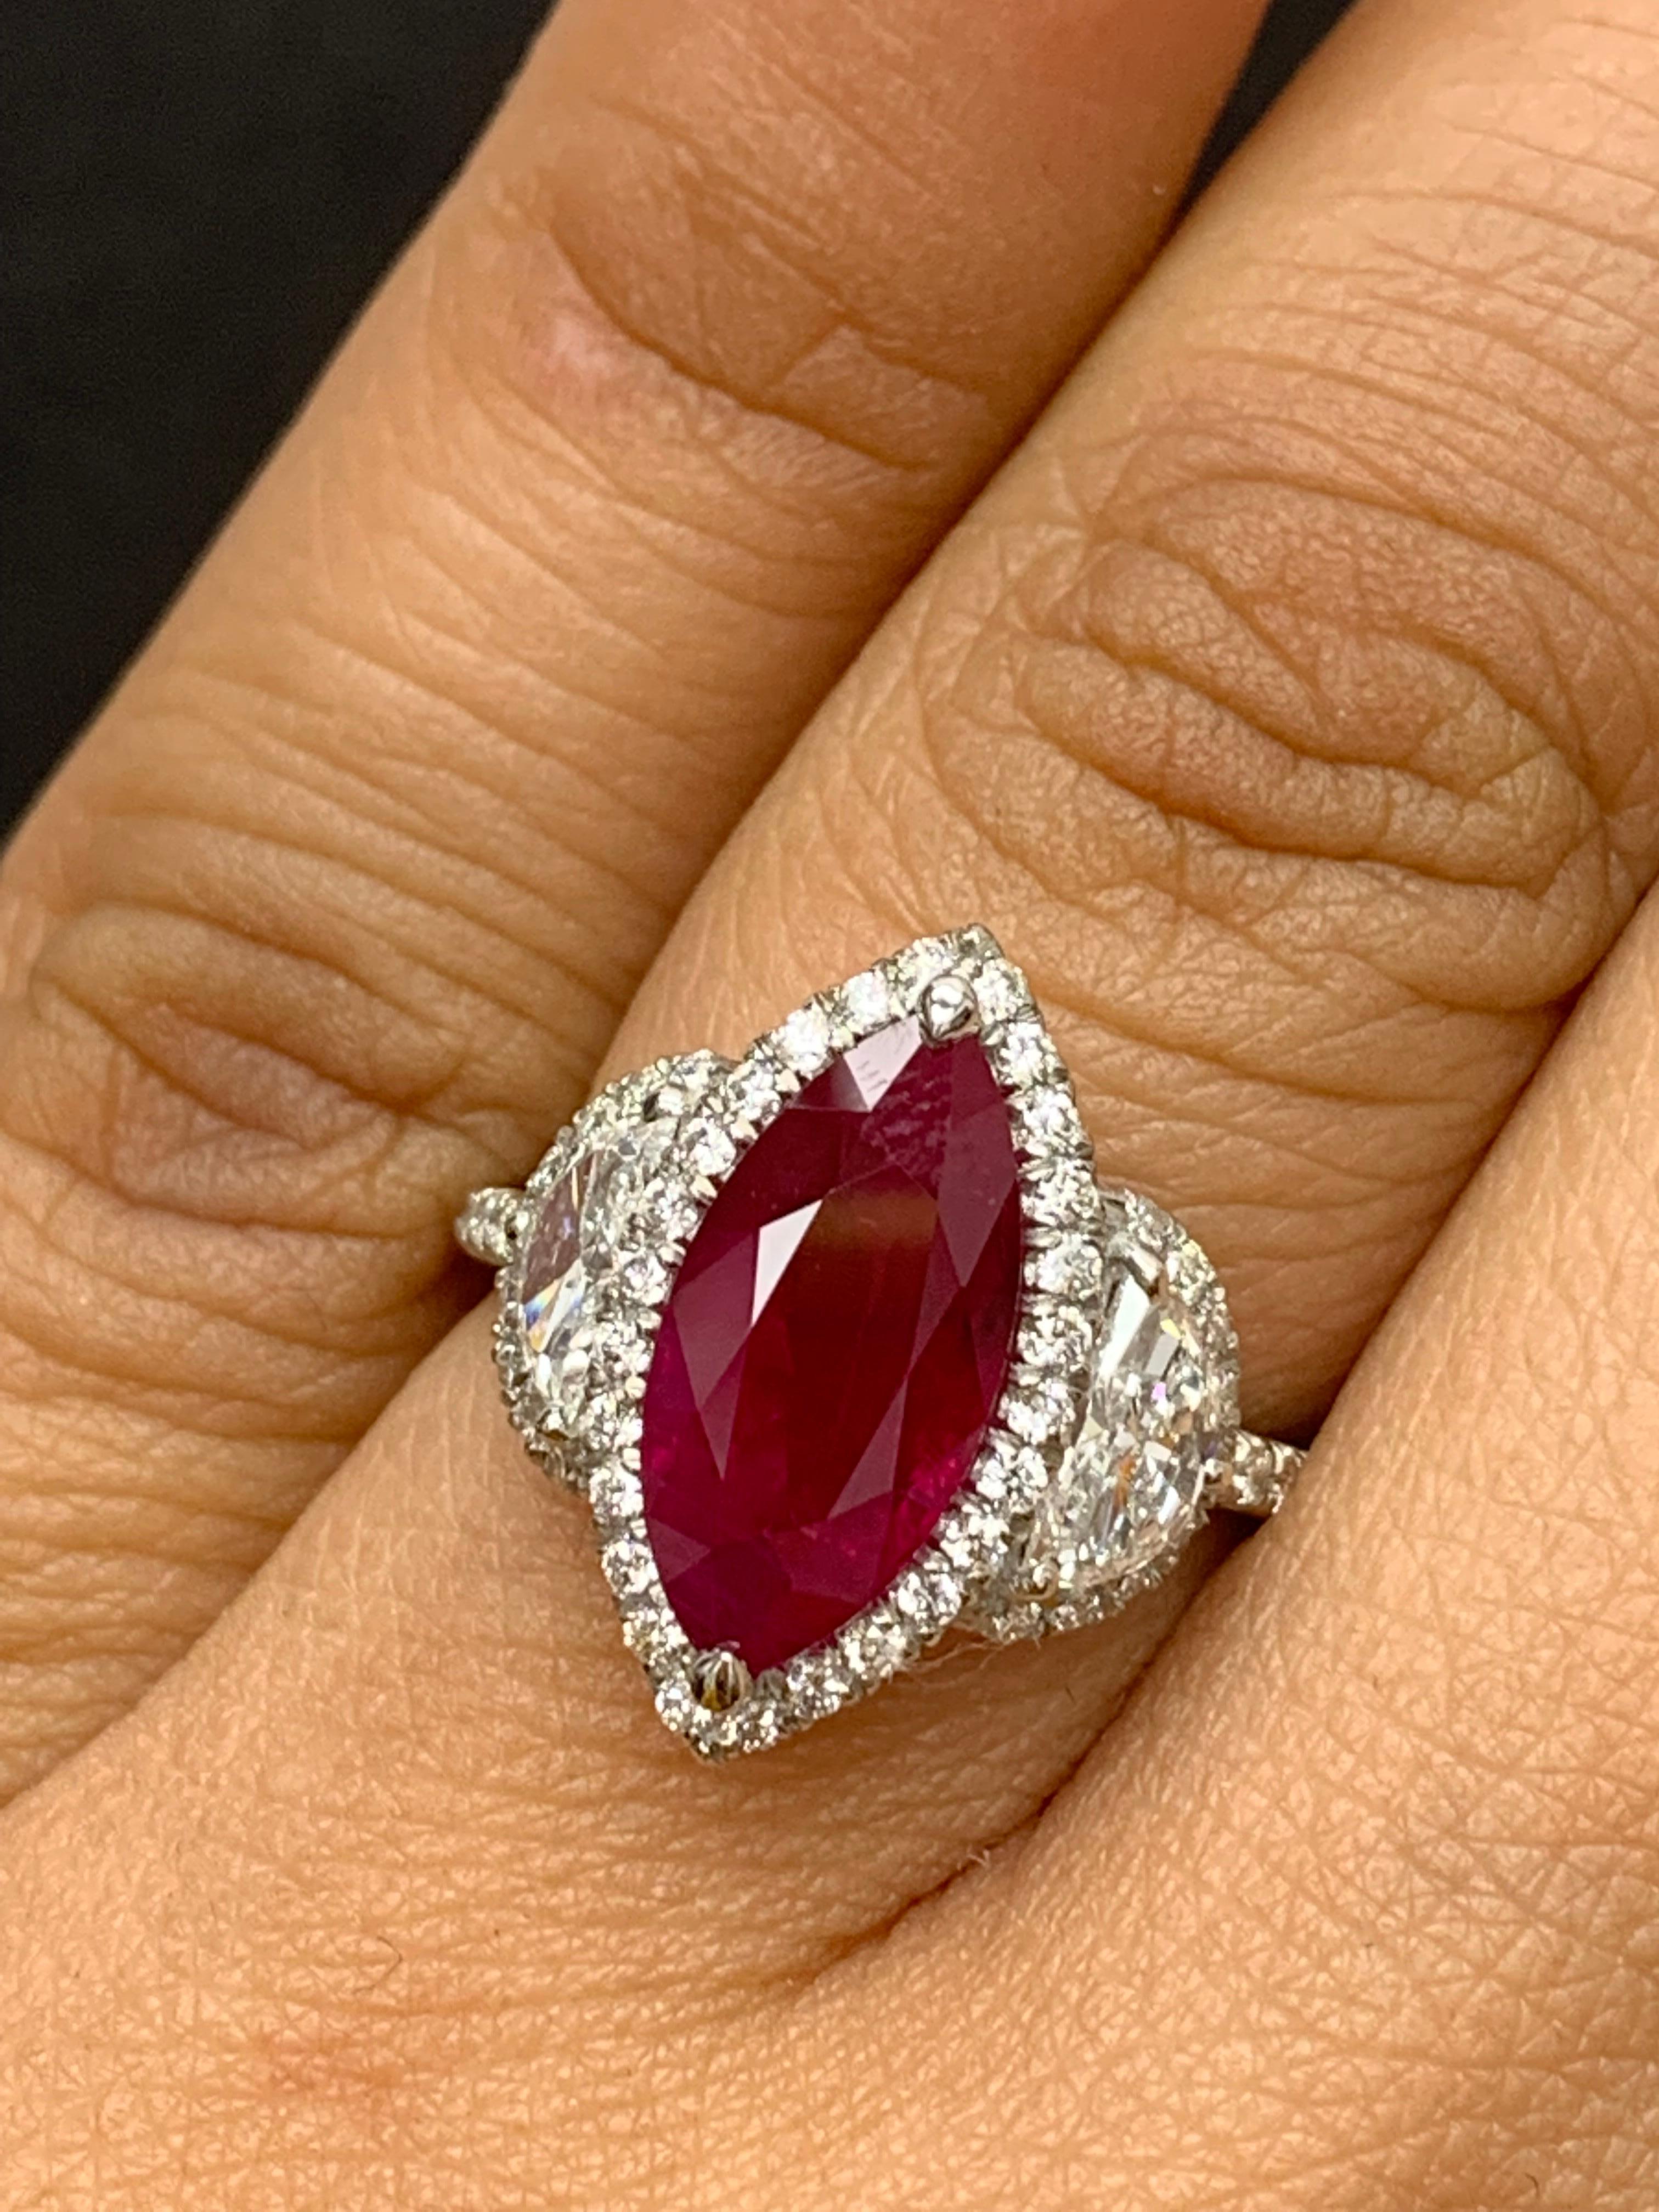 Certified 3.01 Carat Marquise Cut Burma Ruby Diamond 3 Stone Halo Ring Platinum For Sale 3